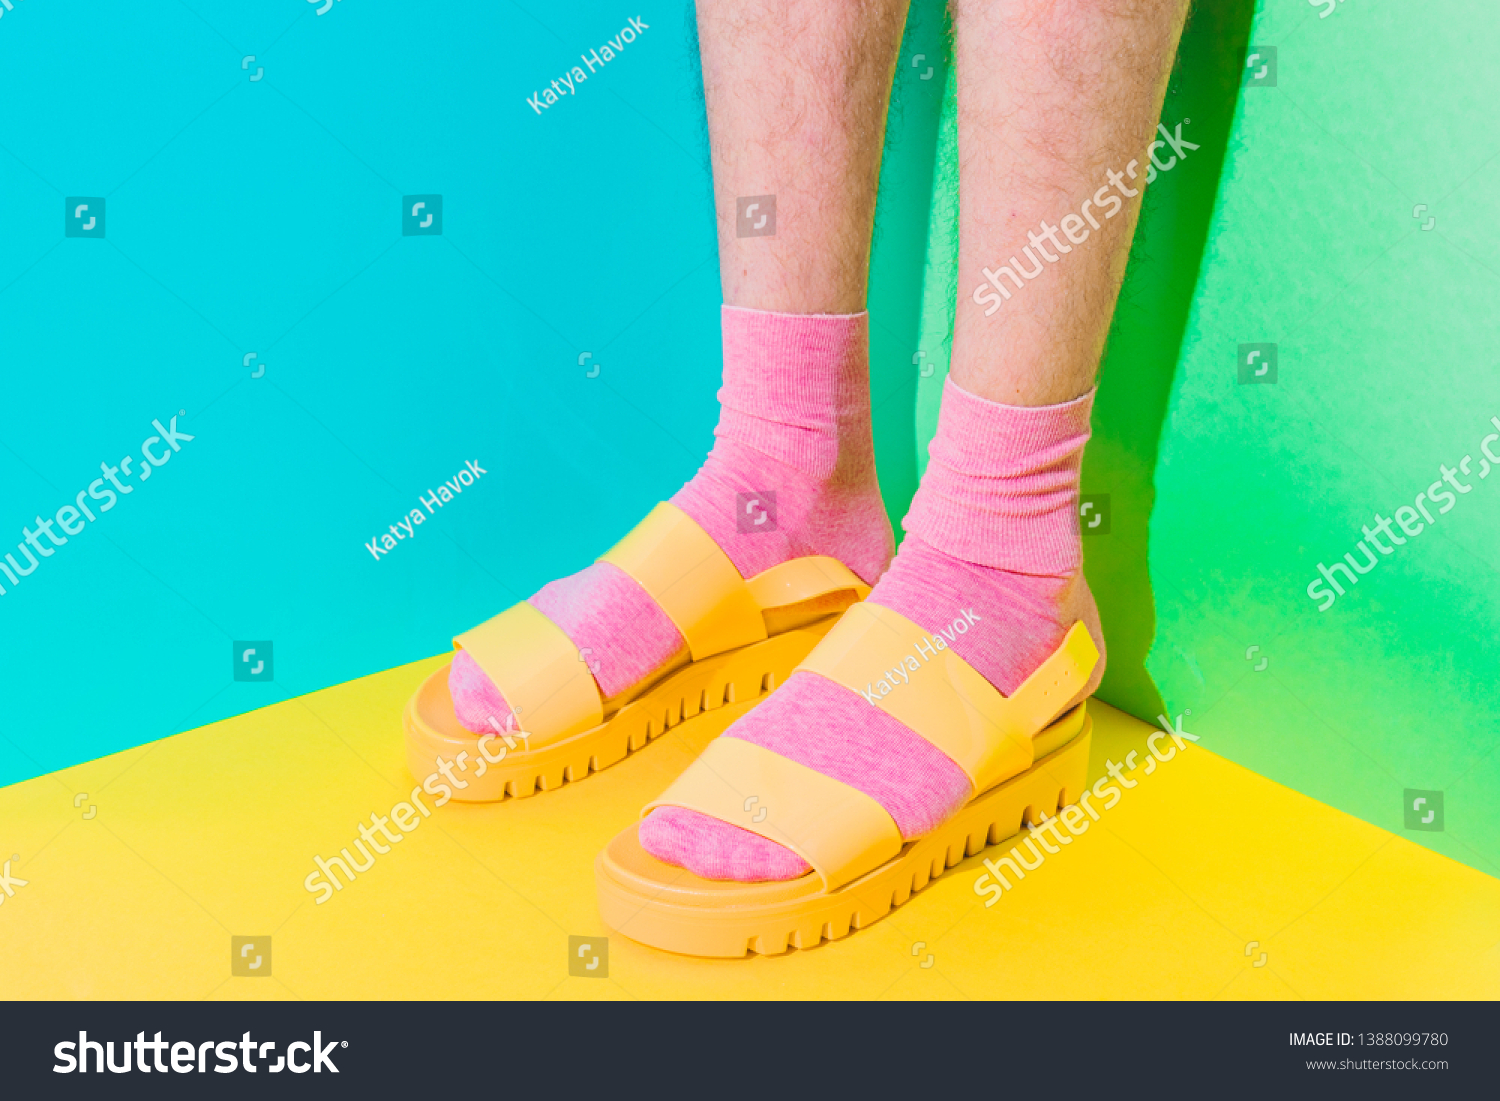 Male hairy legs in socks staying in women's sandals on bold background in the corner with strong shadows. Minimal pride concept. Body part #1388099780